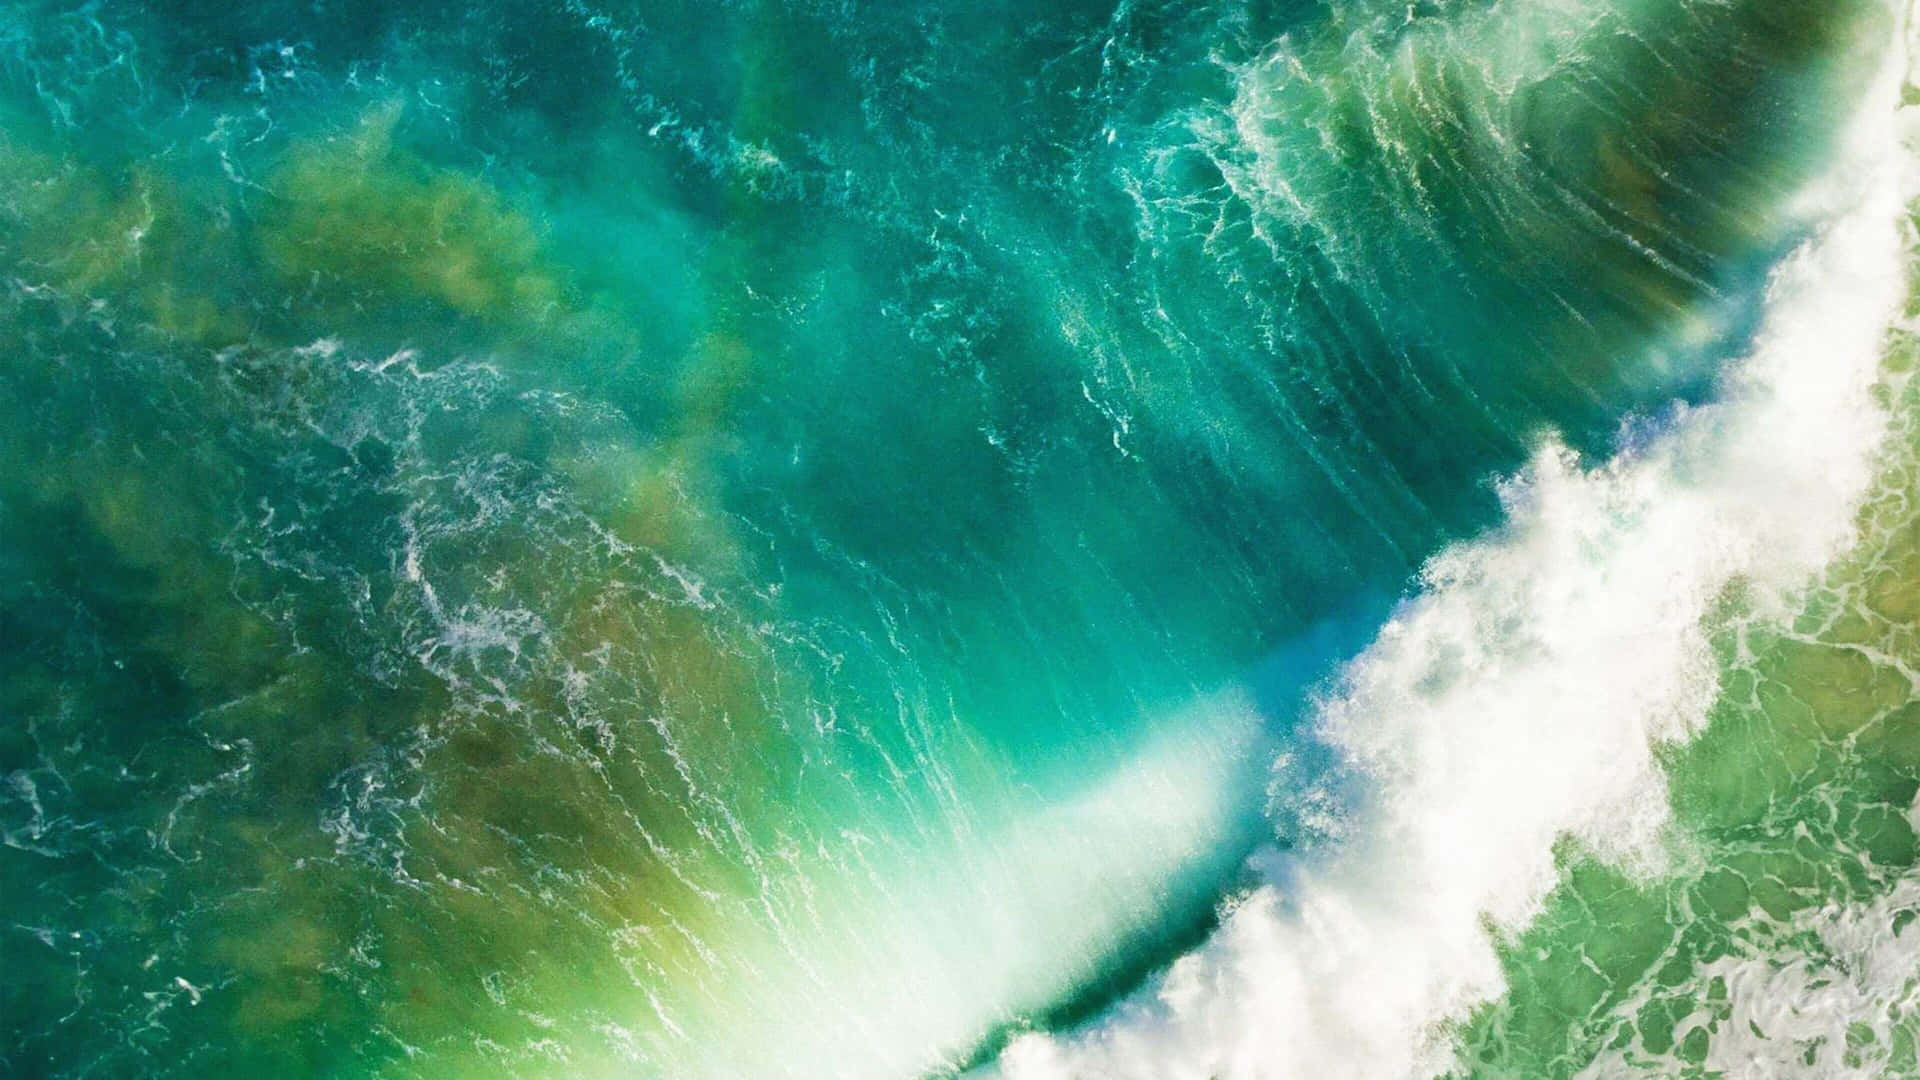 An Aerial View Of A Green Wave In The Ocean Wallpaper